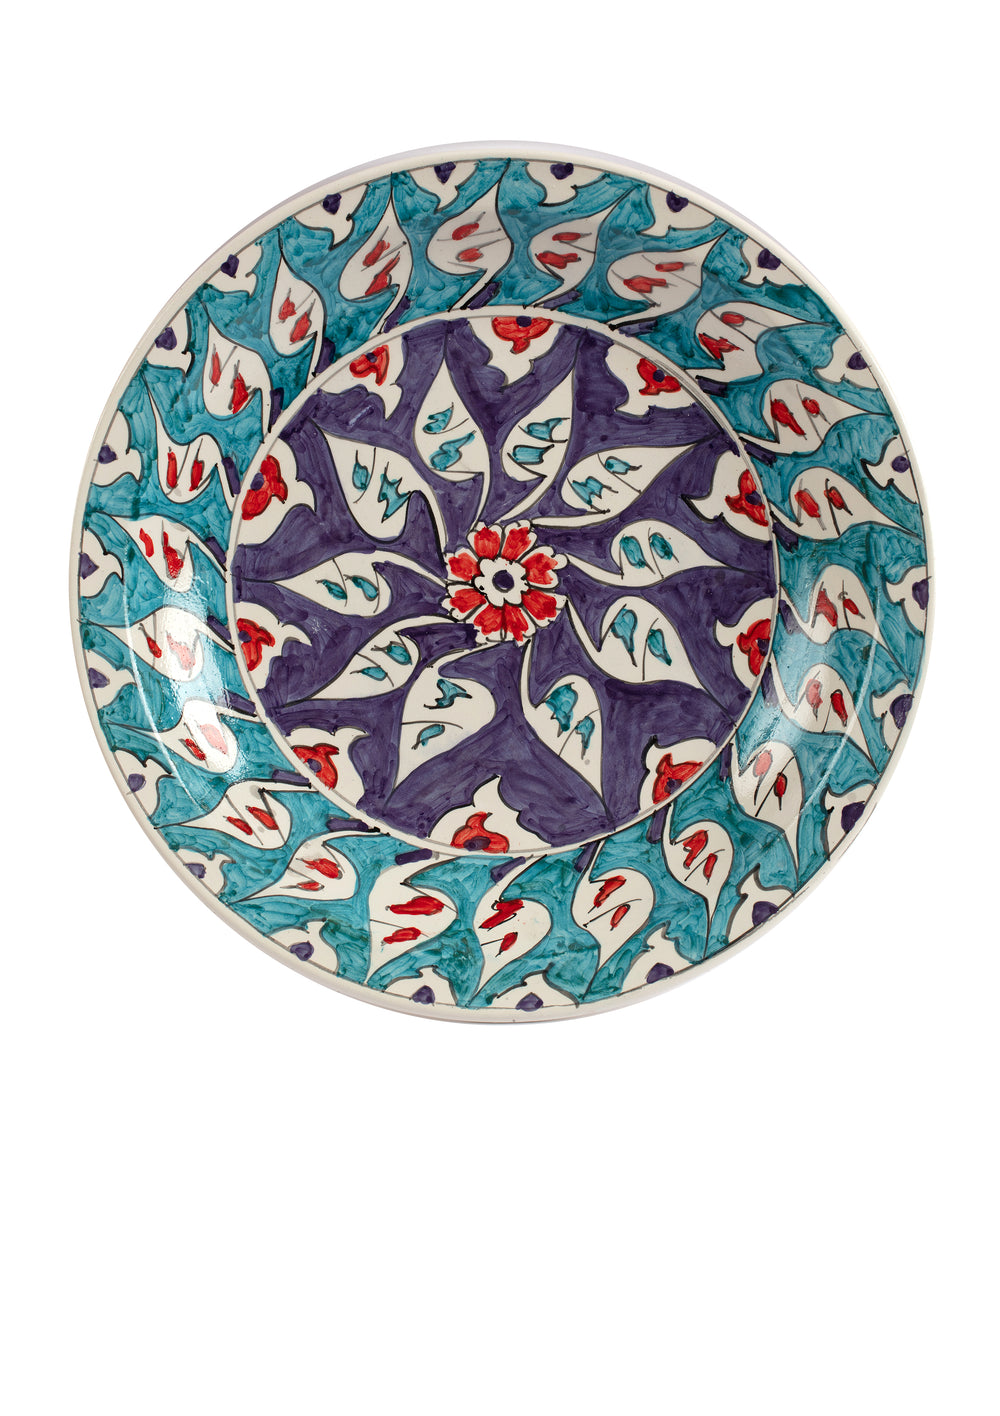 Plate with floral patterns